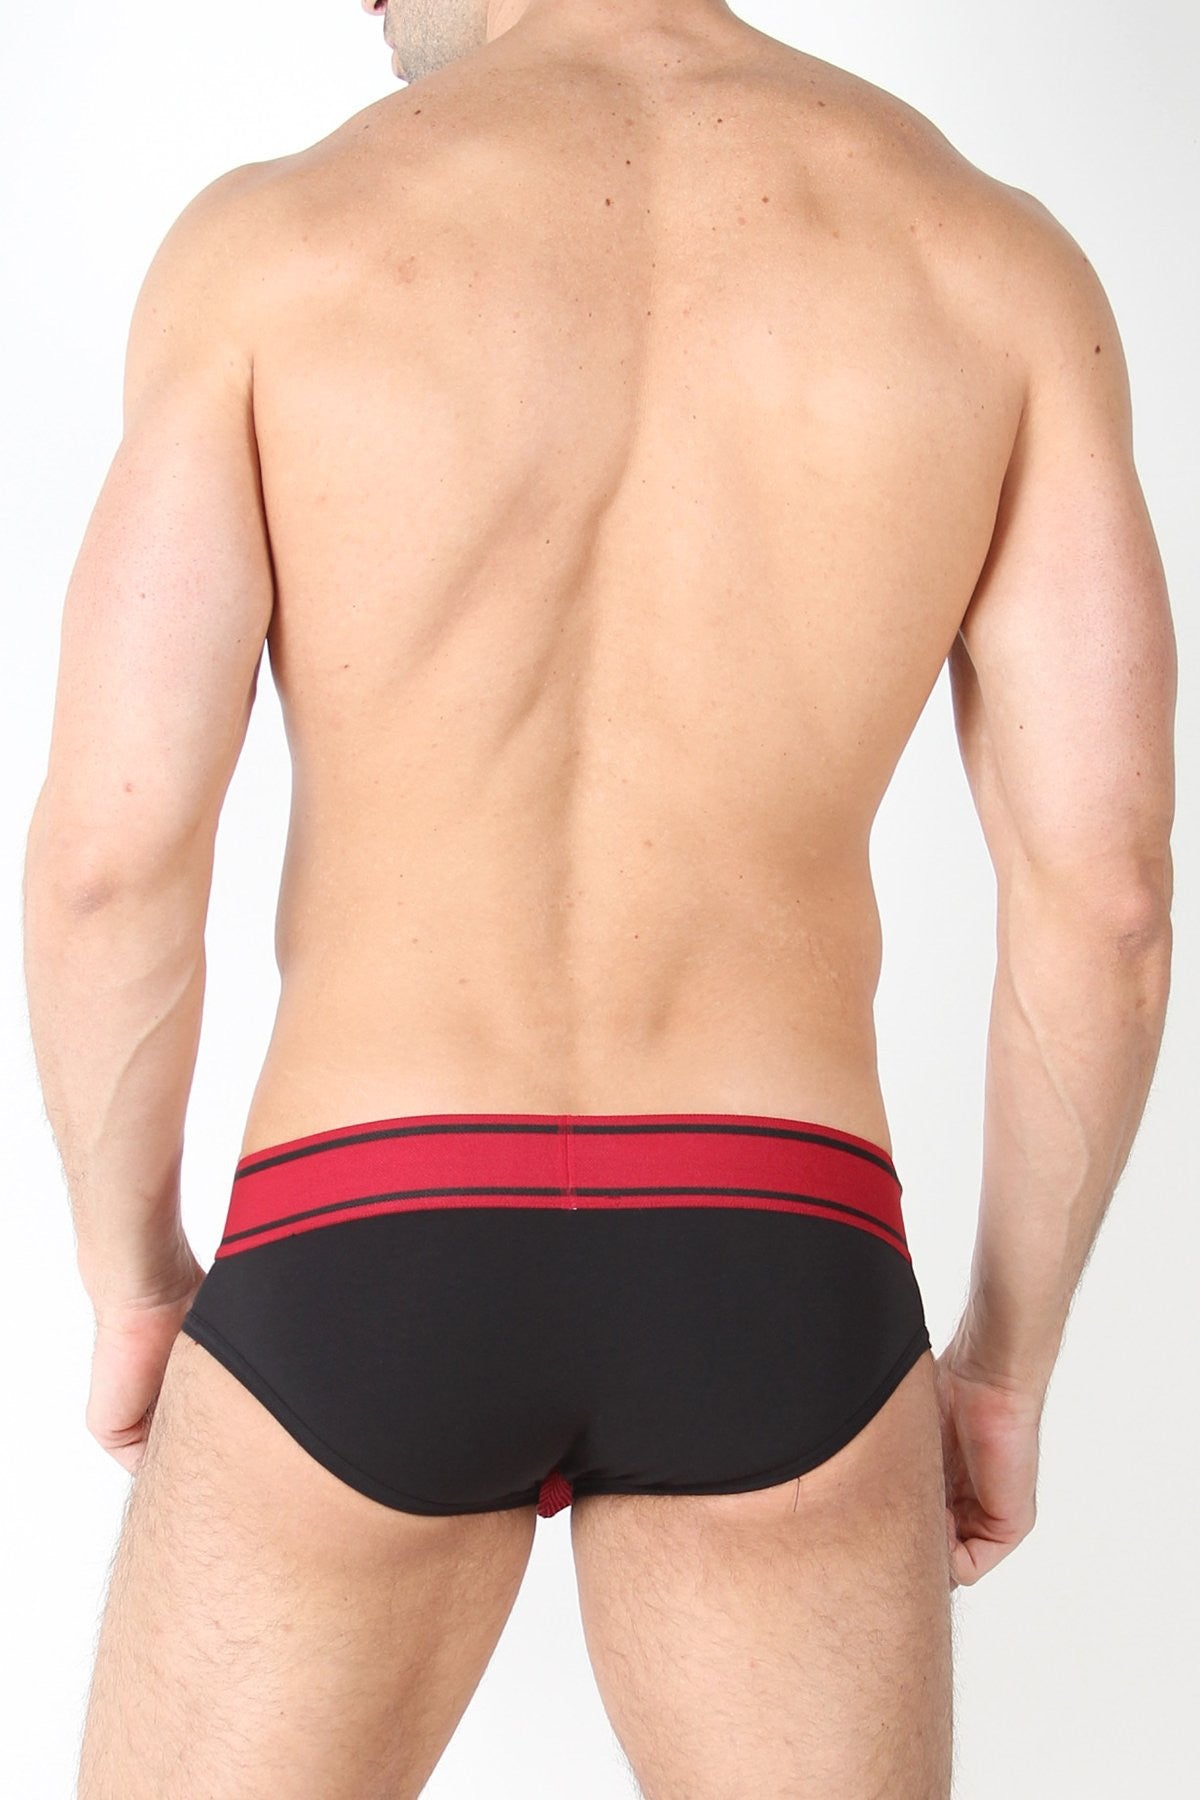 CellBlock 13 Red Halfback Low Rise Brief